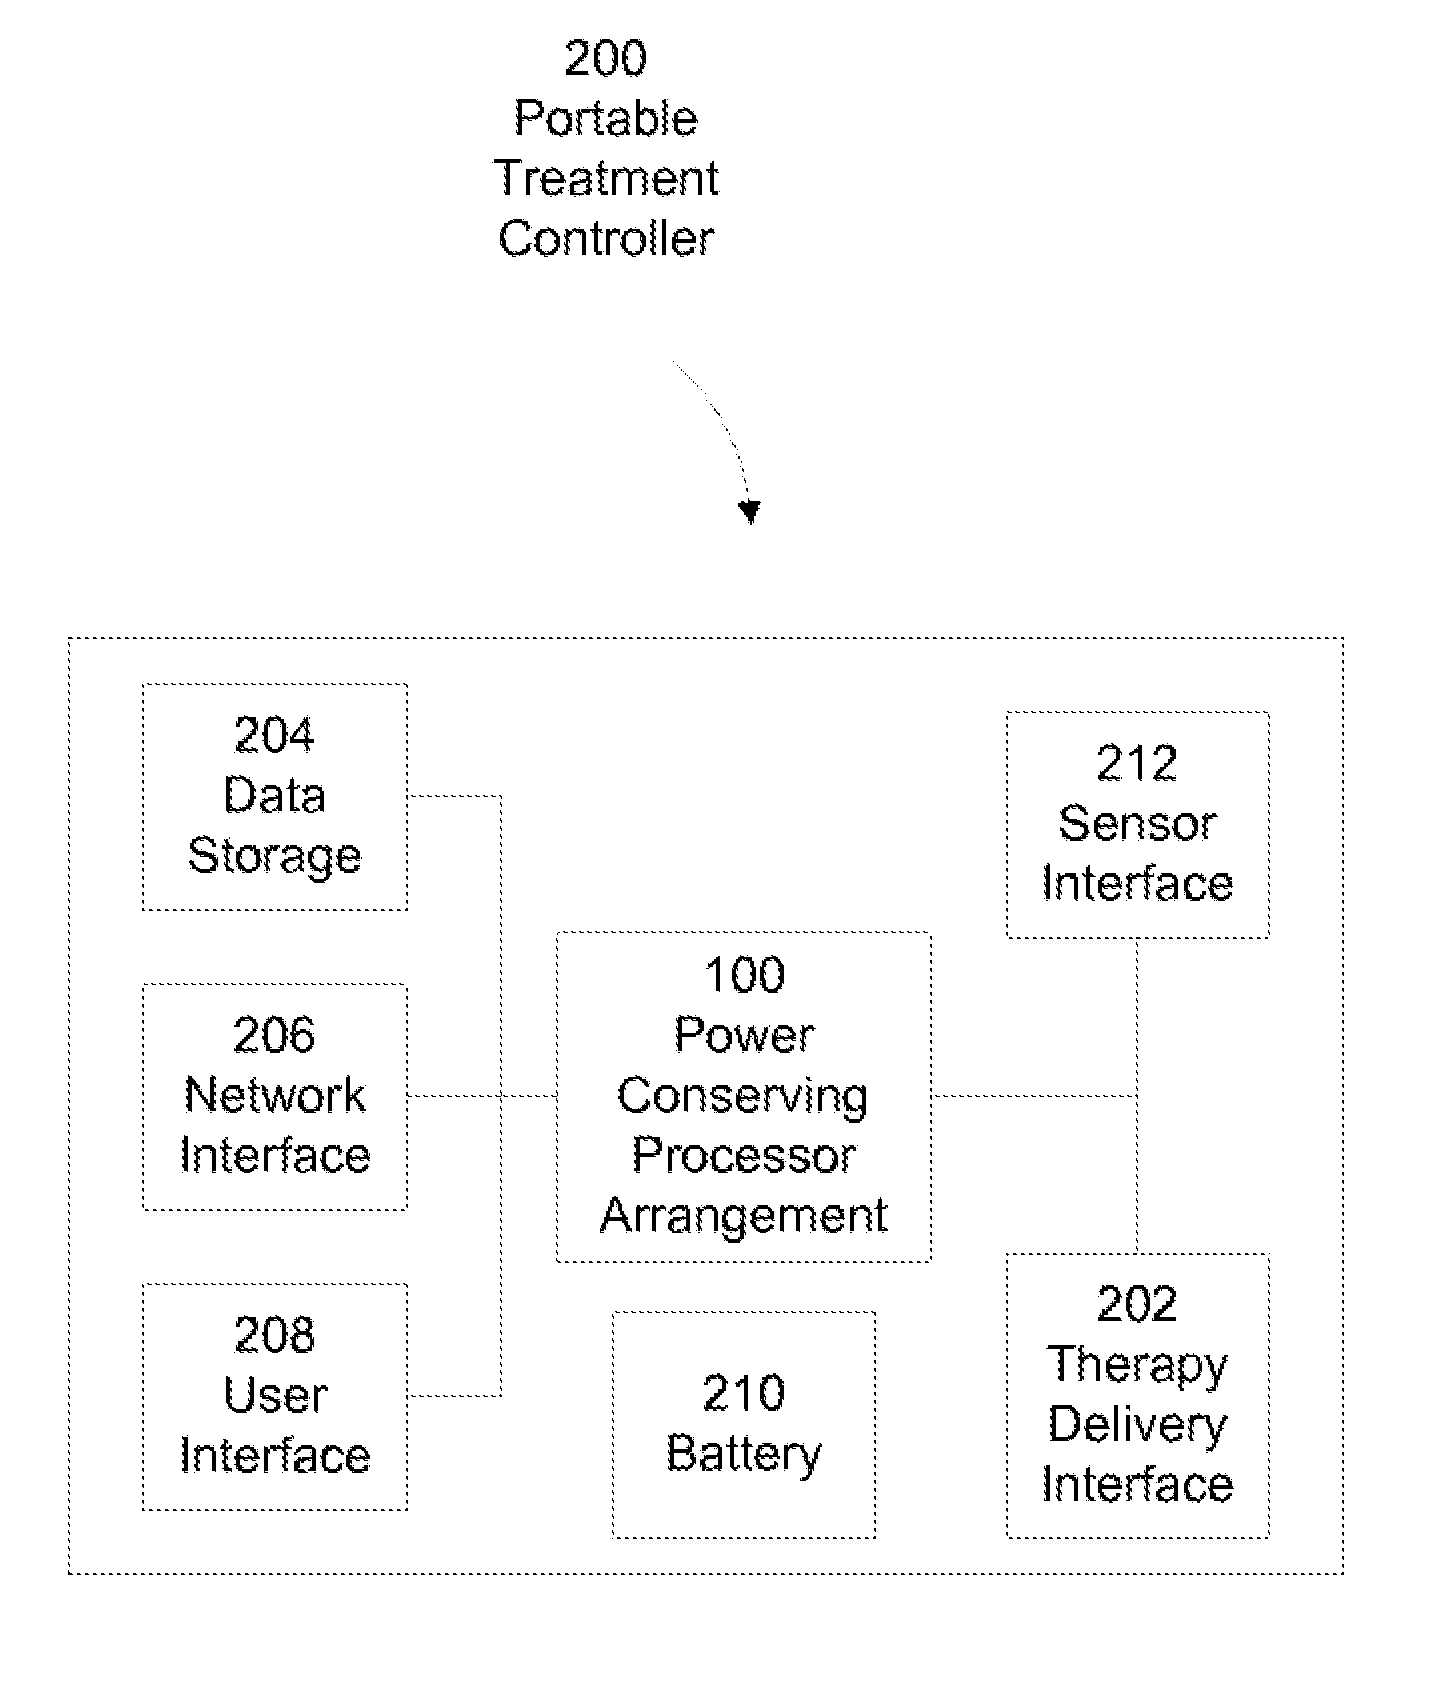 System and method for conserving power in a medical device